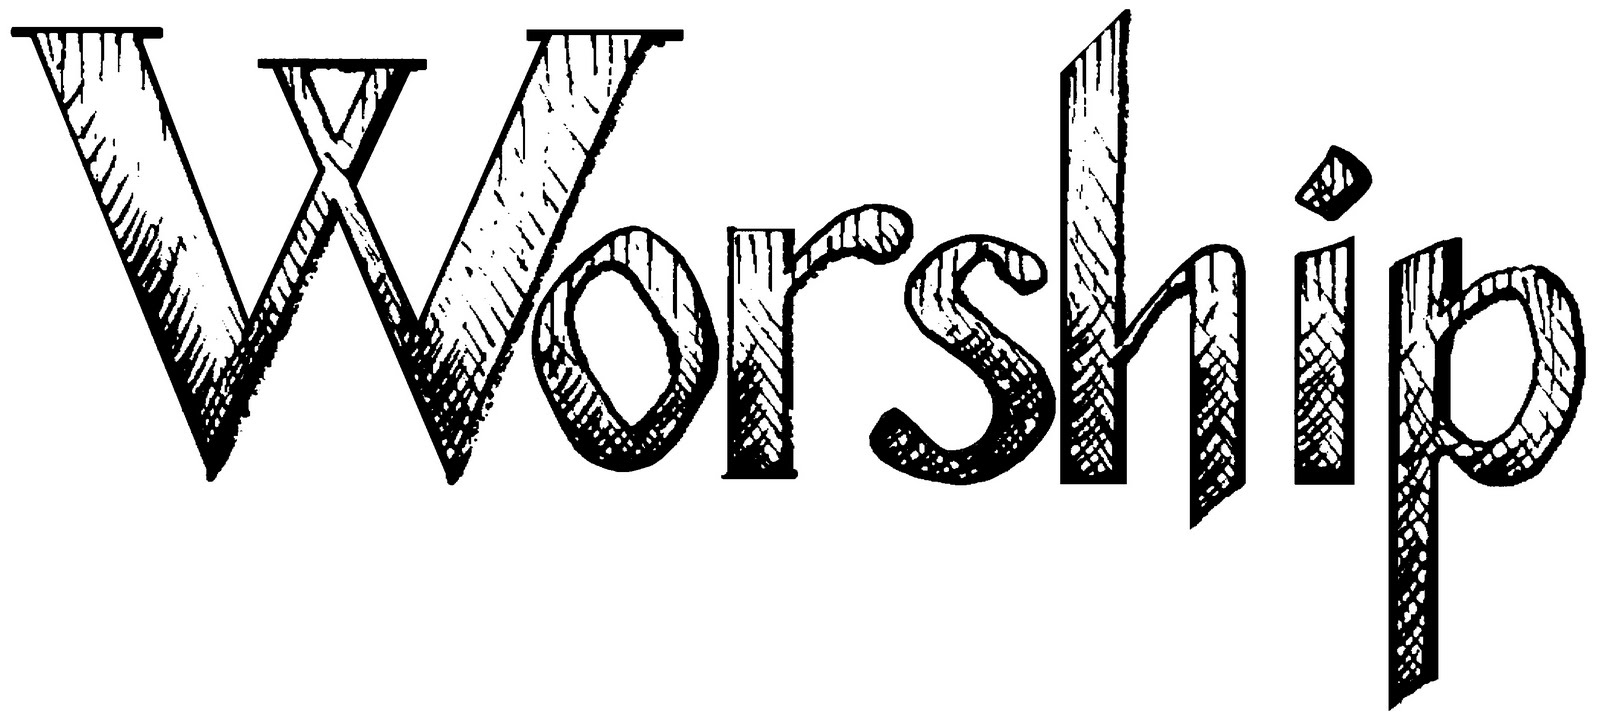 Welcome worship clipart.